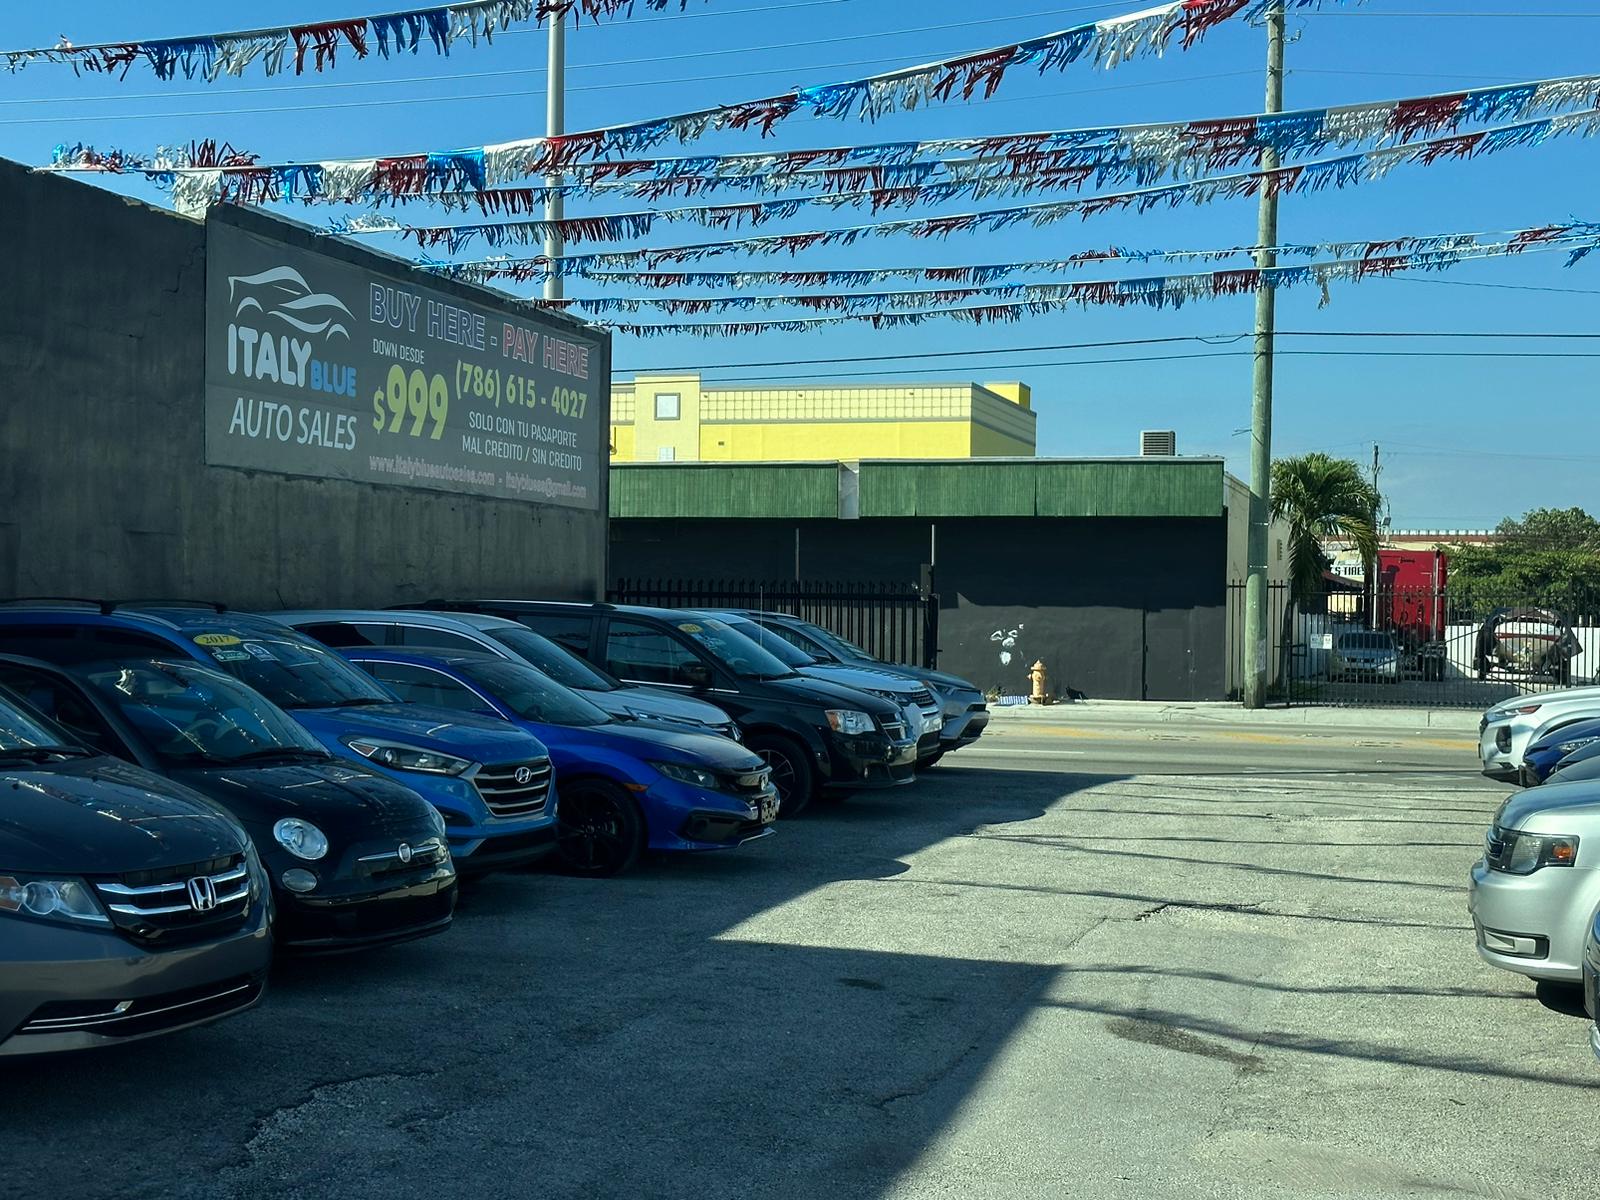 Italy Blue Auto Sales | Used Cars For sale in Miami